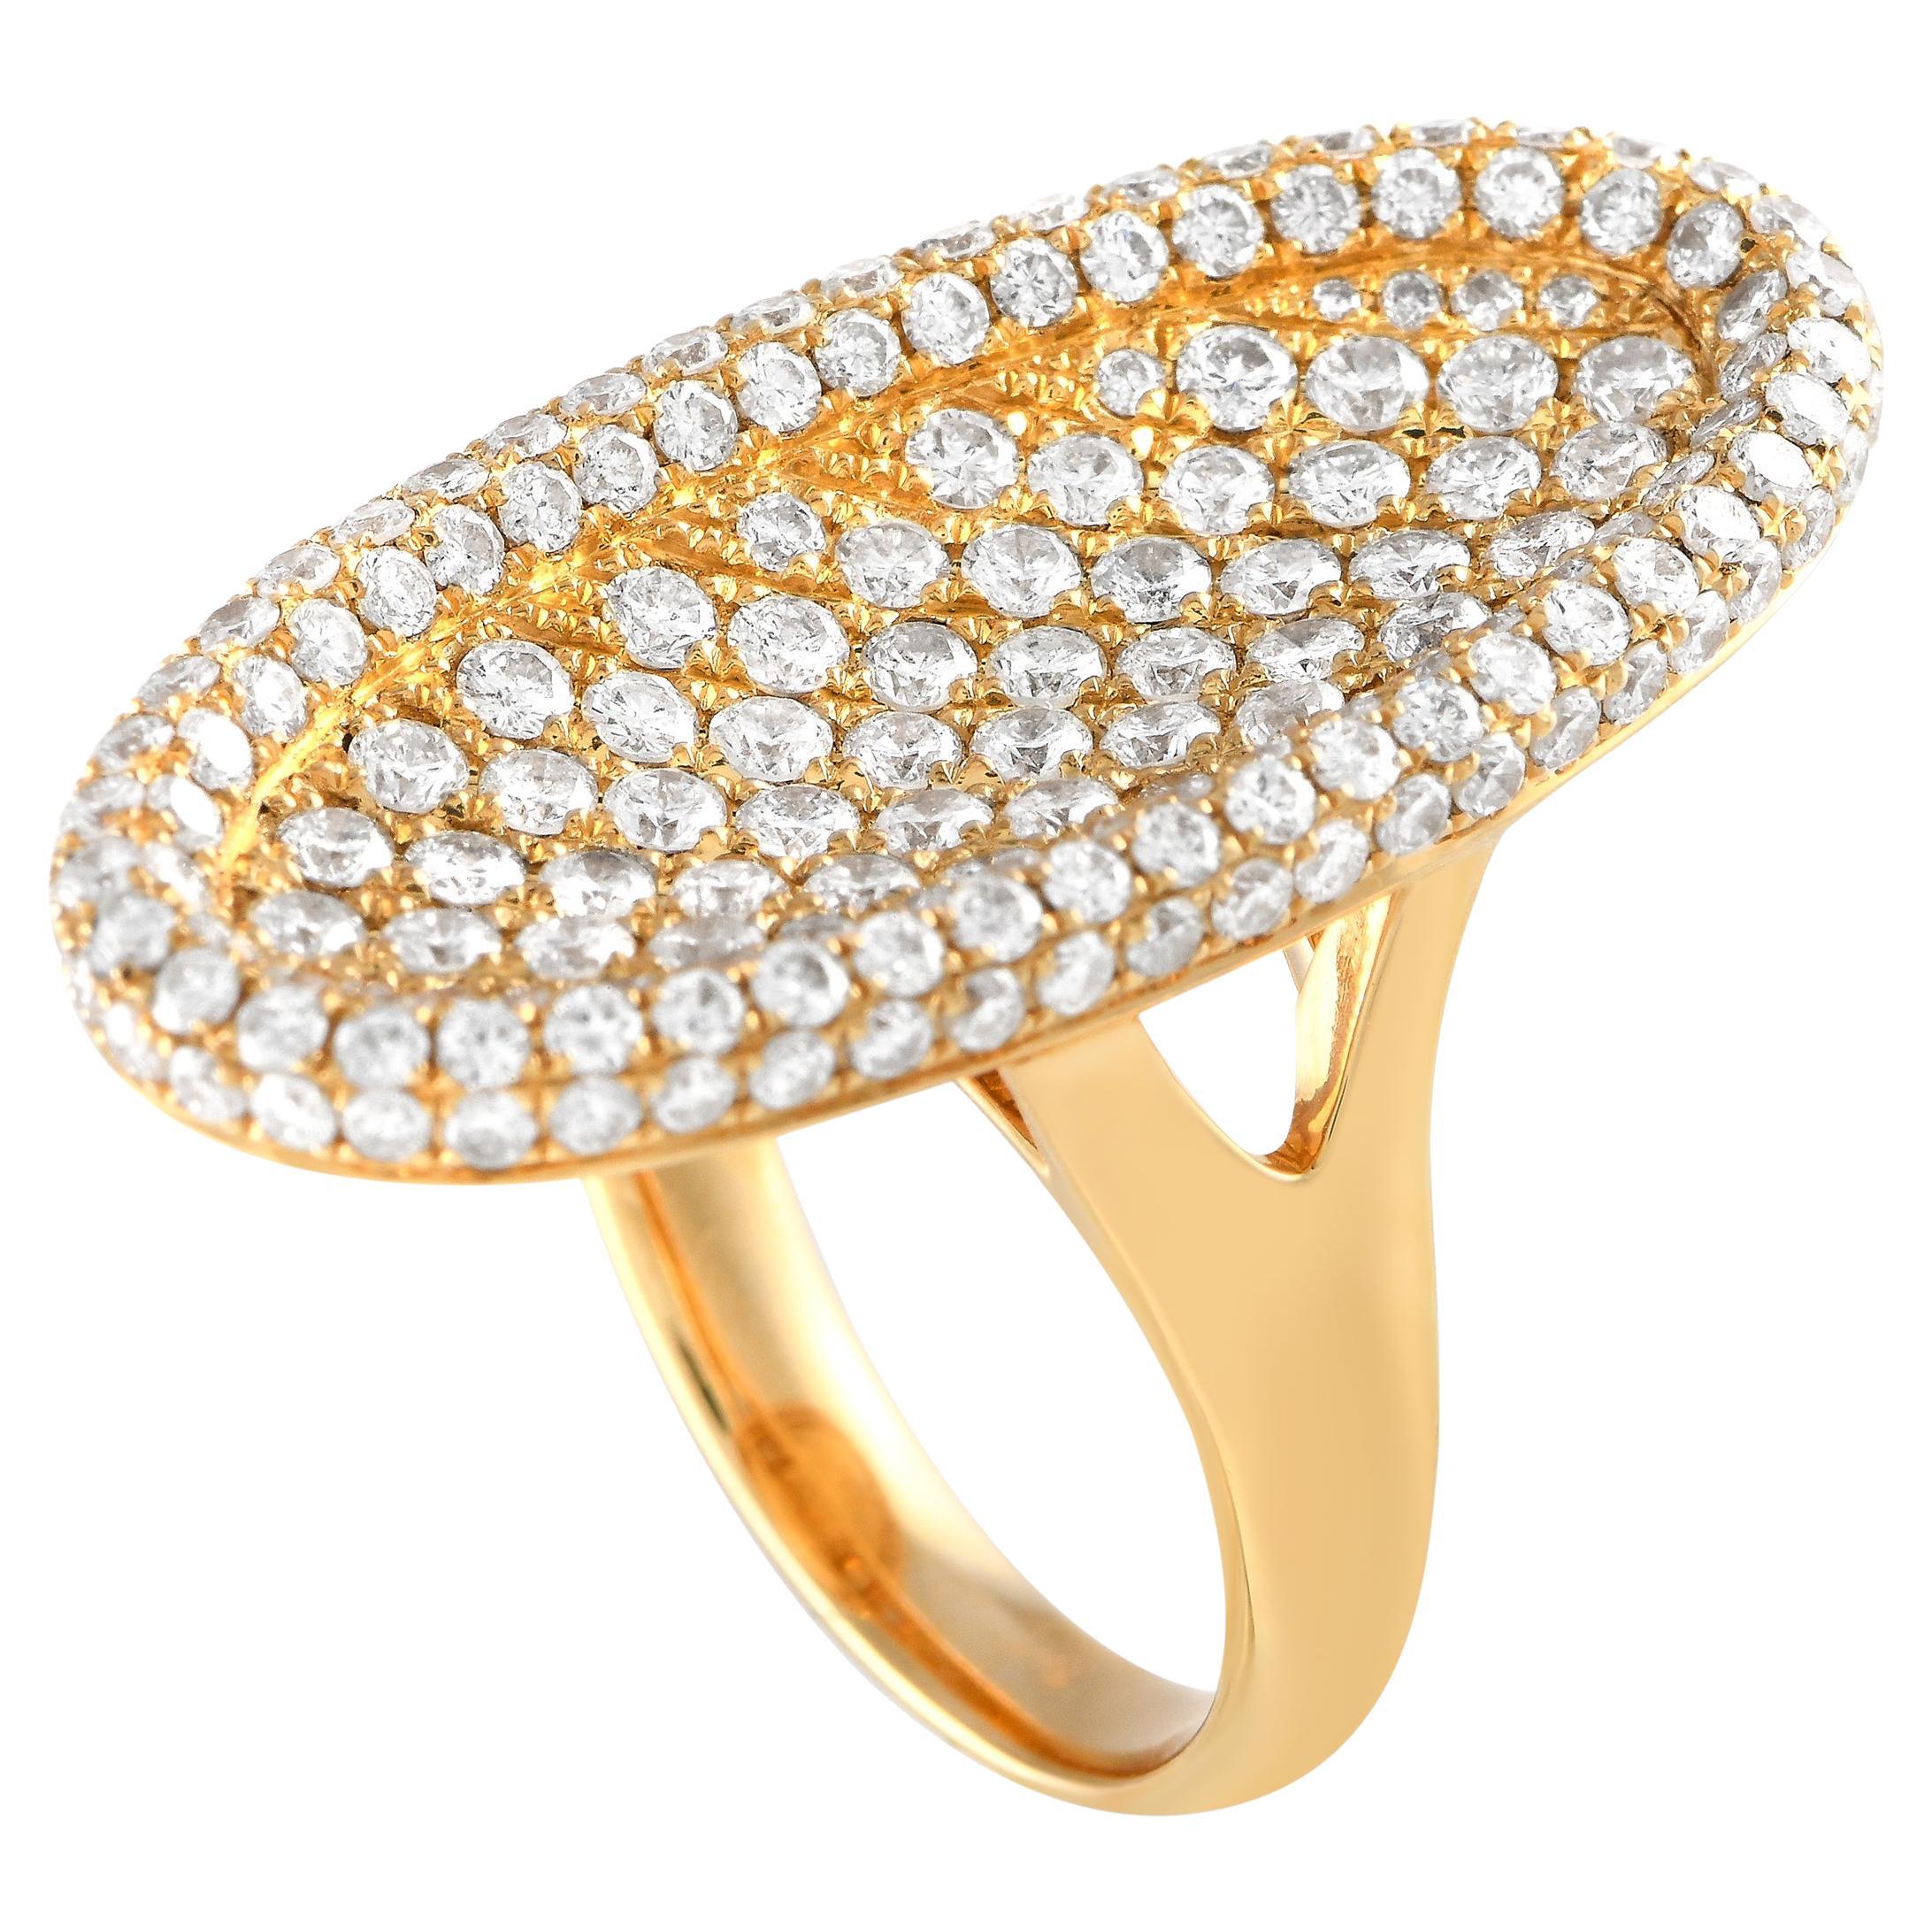 LB Exclusive 18K Gelbgold 3.0ct Diamant Oval Ring im Angebot